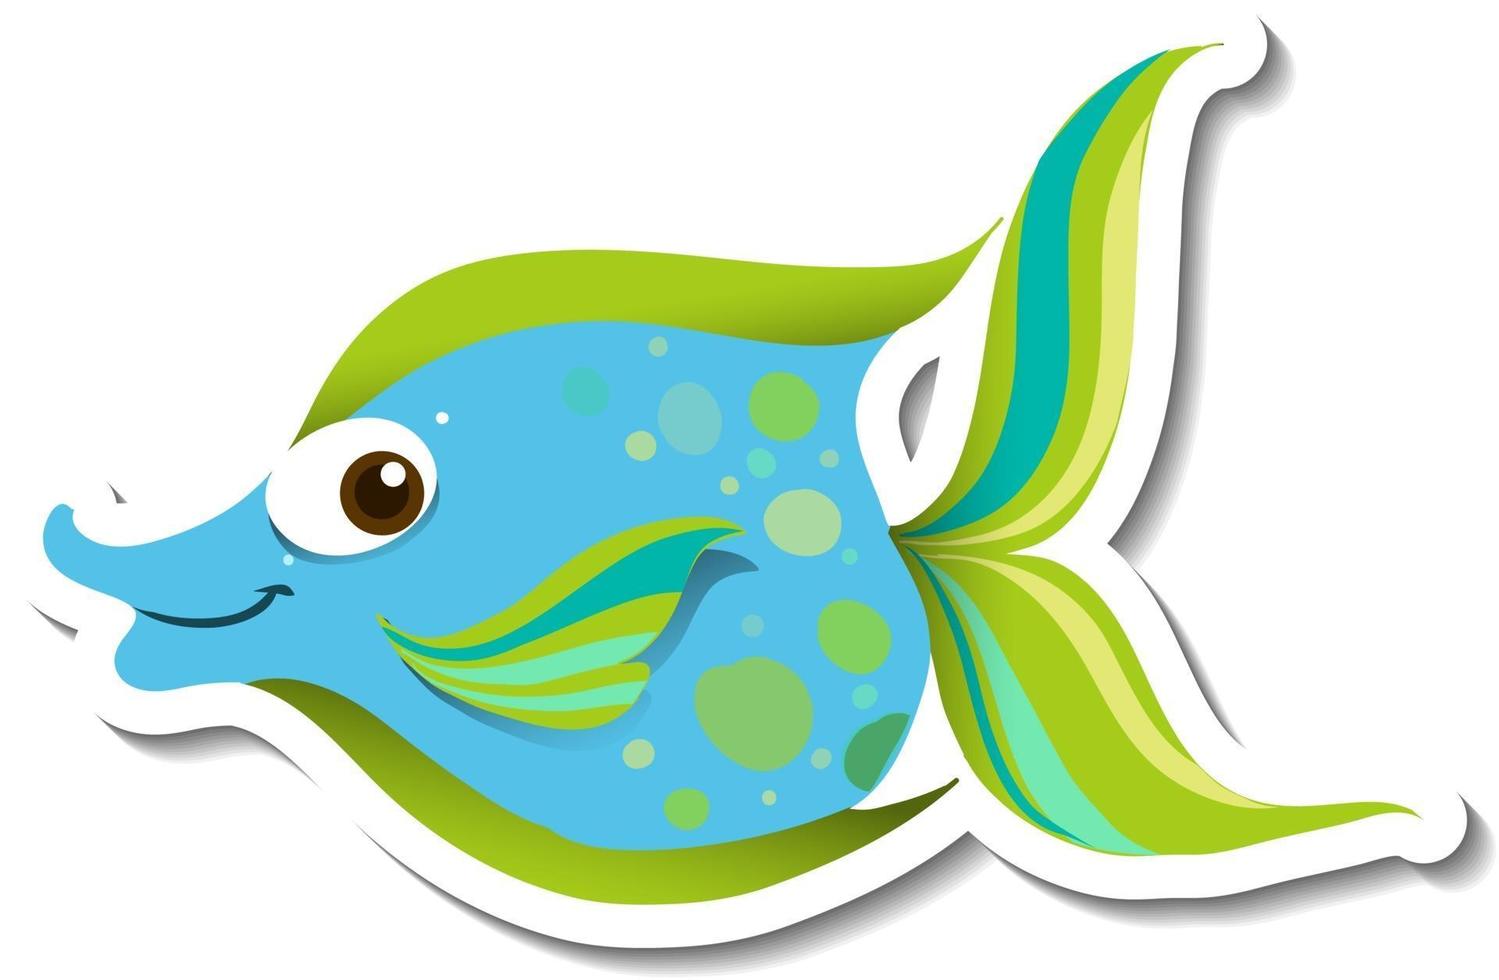 Sticker template with cute fish cartoon character isolated vector